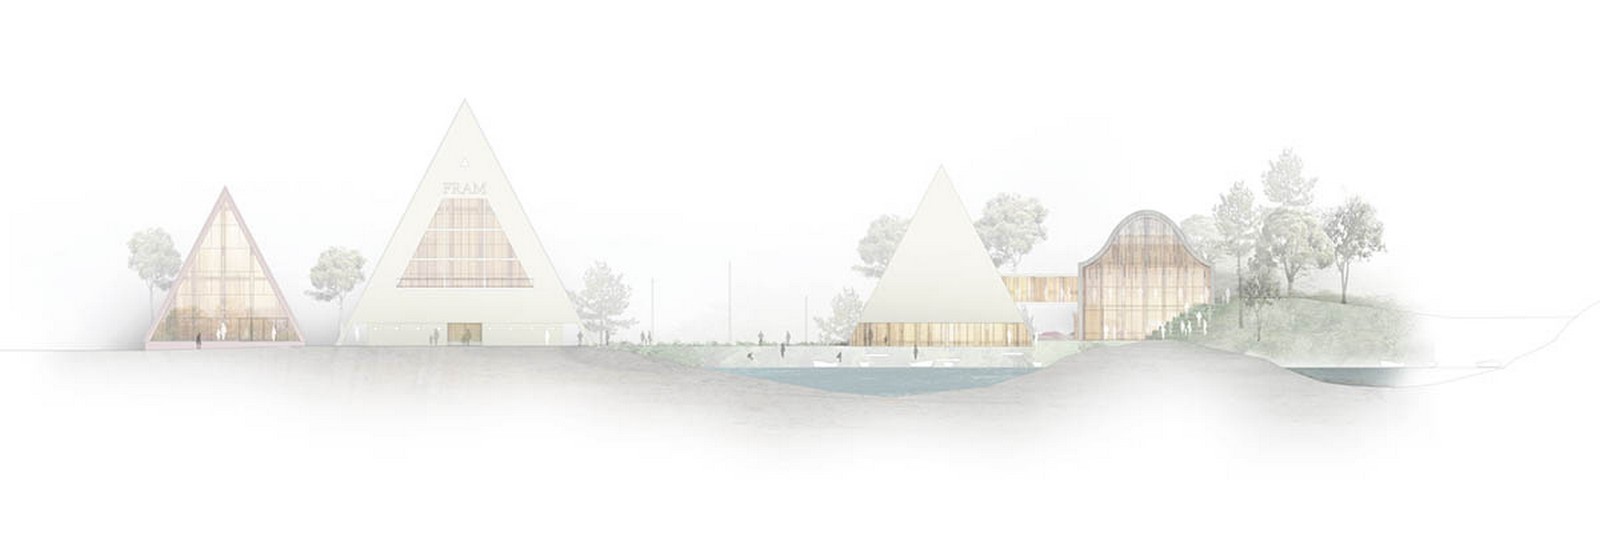 New Extension Of Norway's Polar Exploration Museum "FRAM" to be designed by Reiulf Ramstad Arkitekter - Sheet8